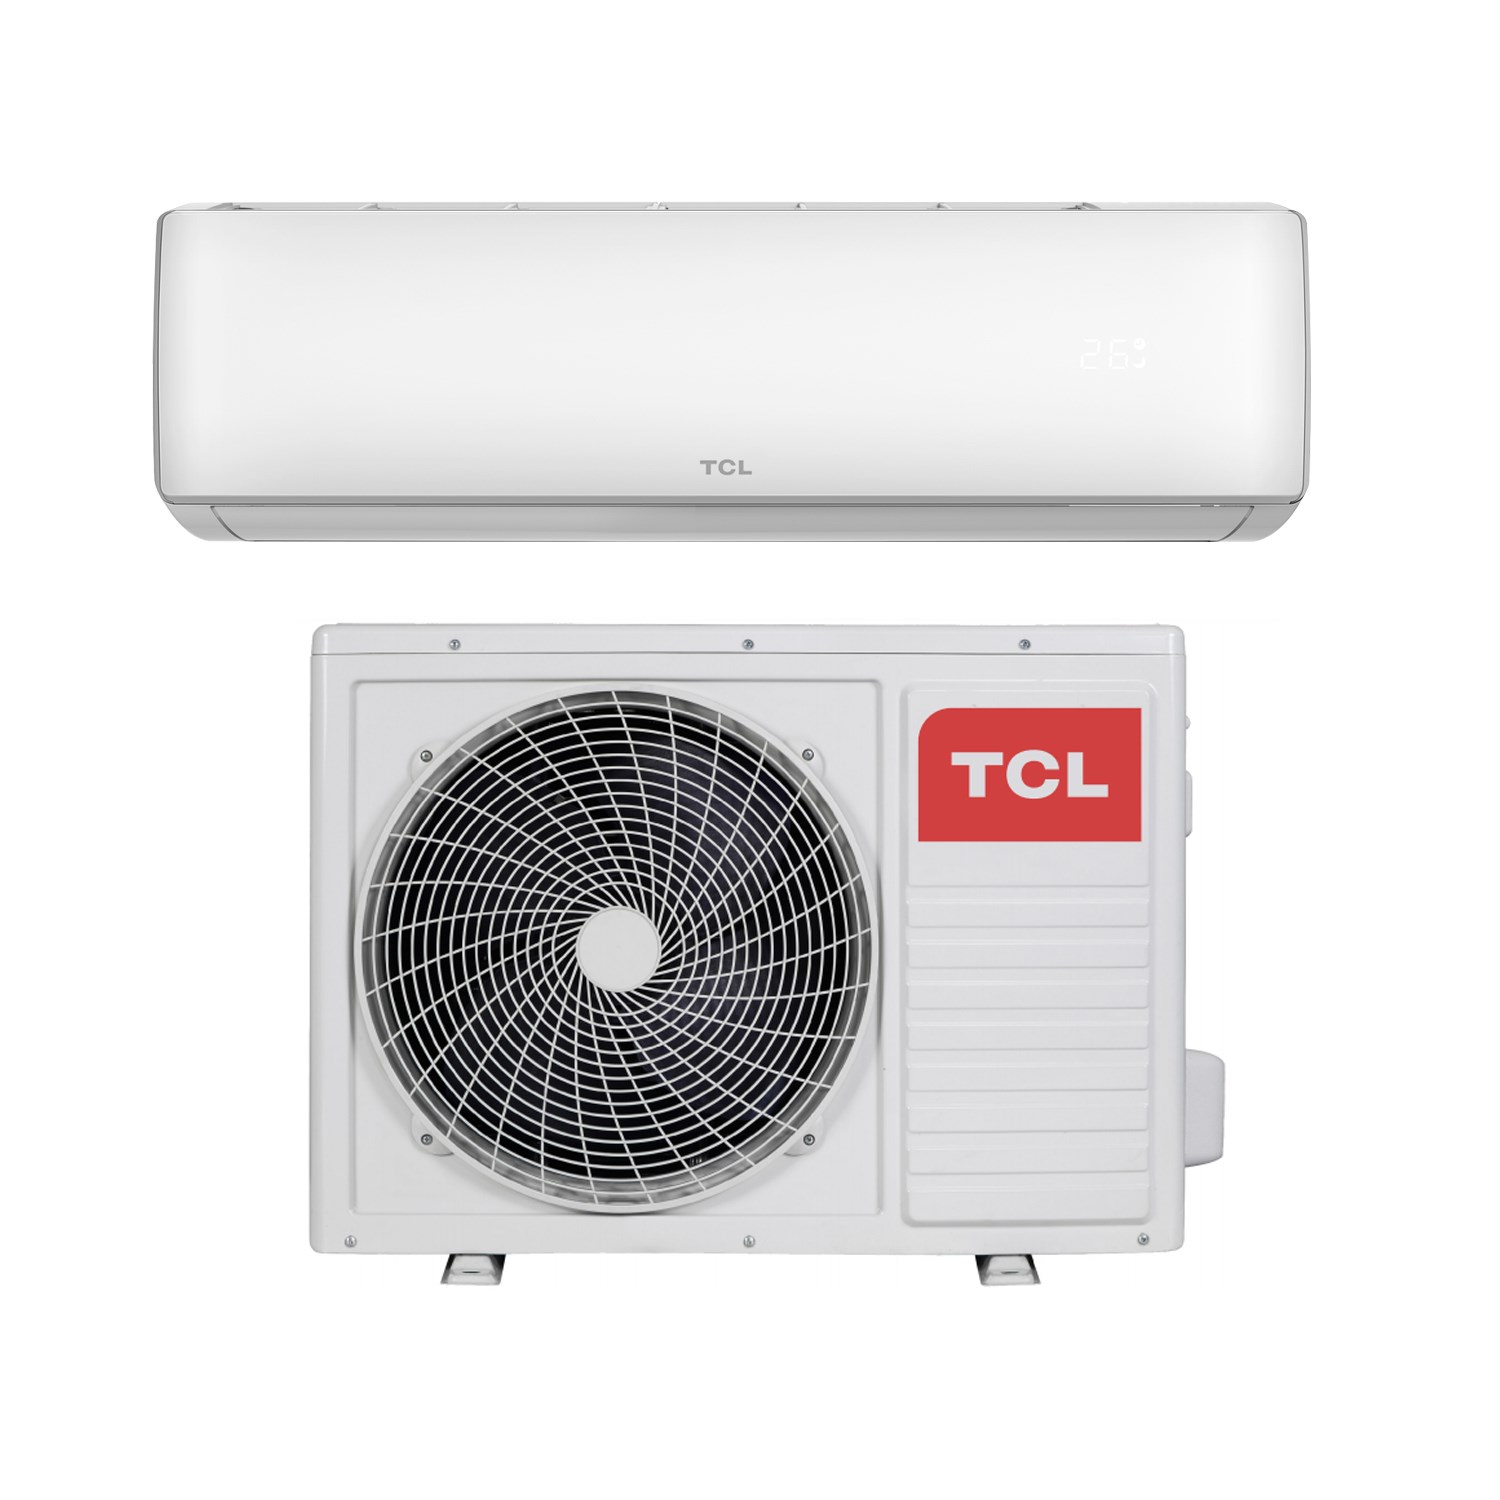 1.5 HP TCL Air Conditioner | TCL Air Conditioner | Reapp Ghana